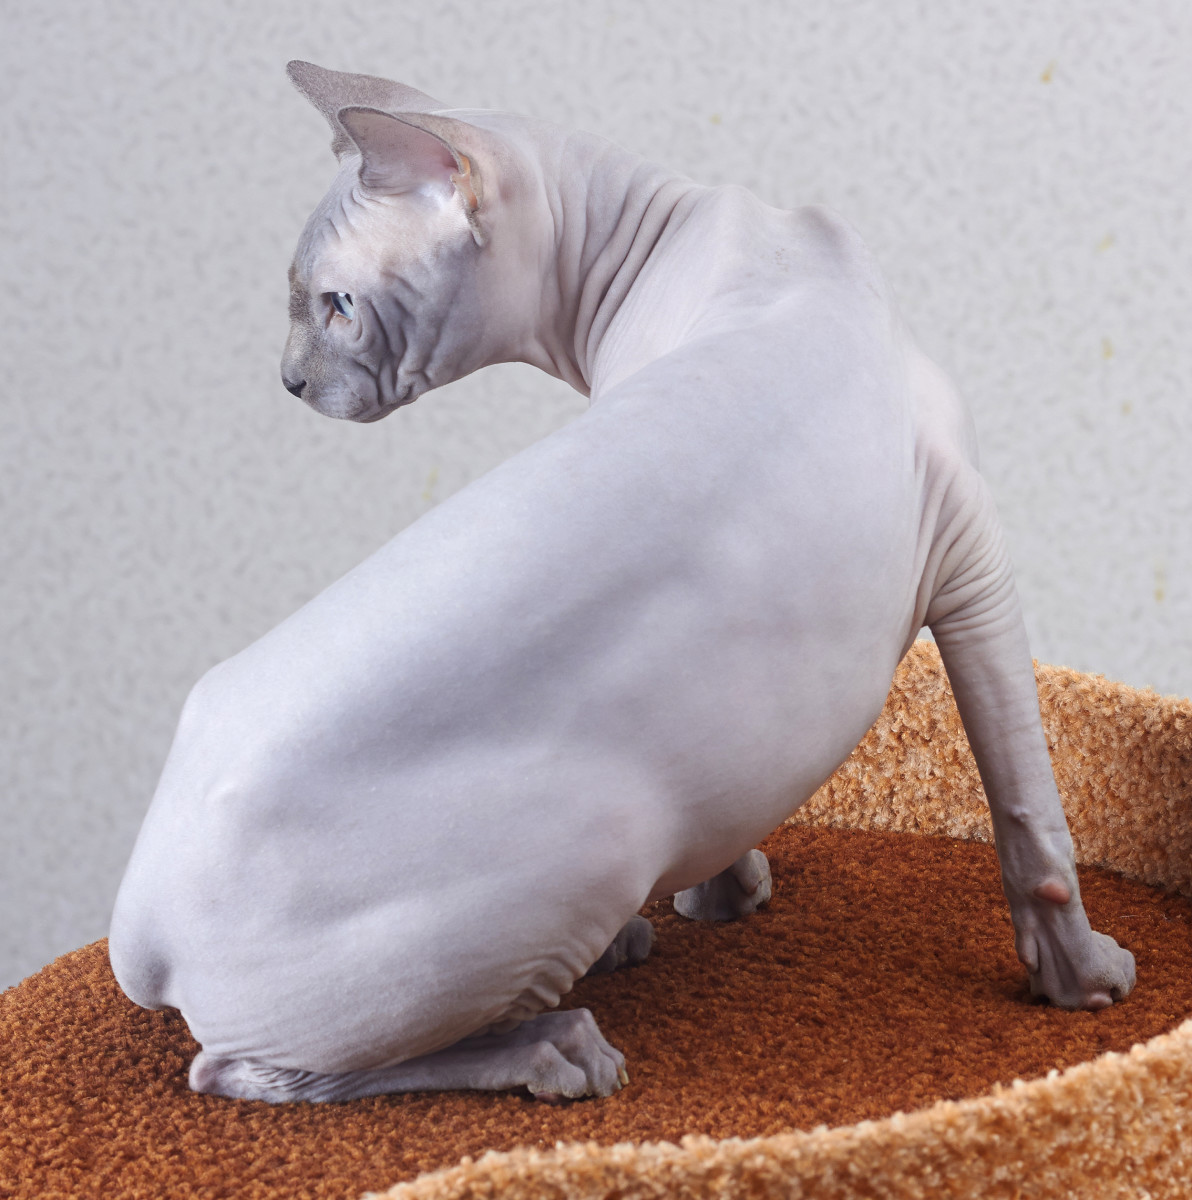 The Sphynx cat is the most popular of hairless cats around the world.